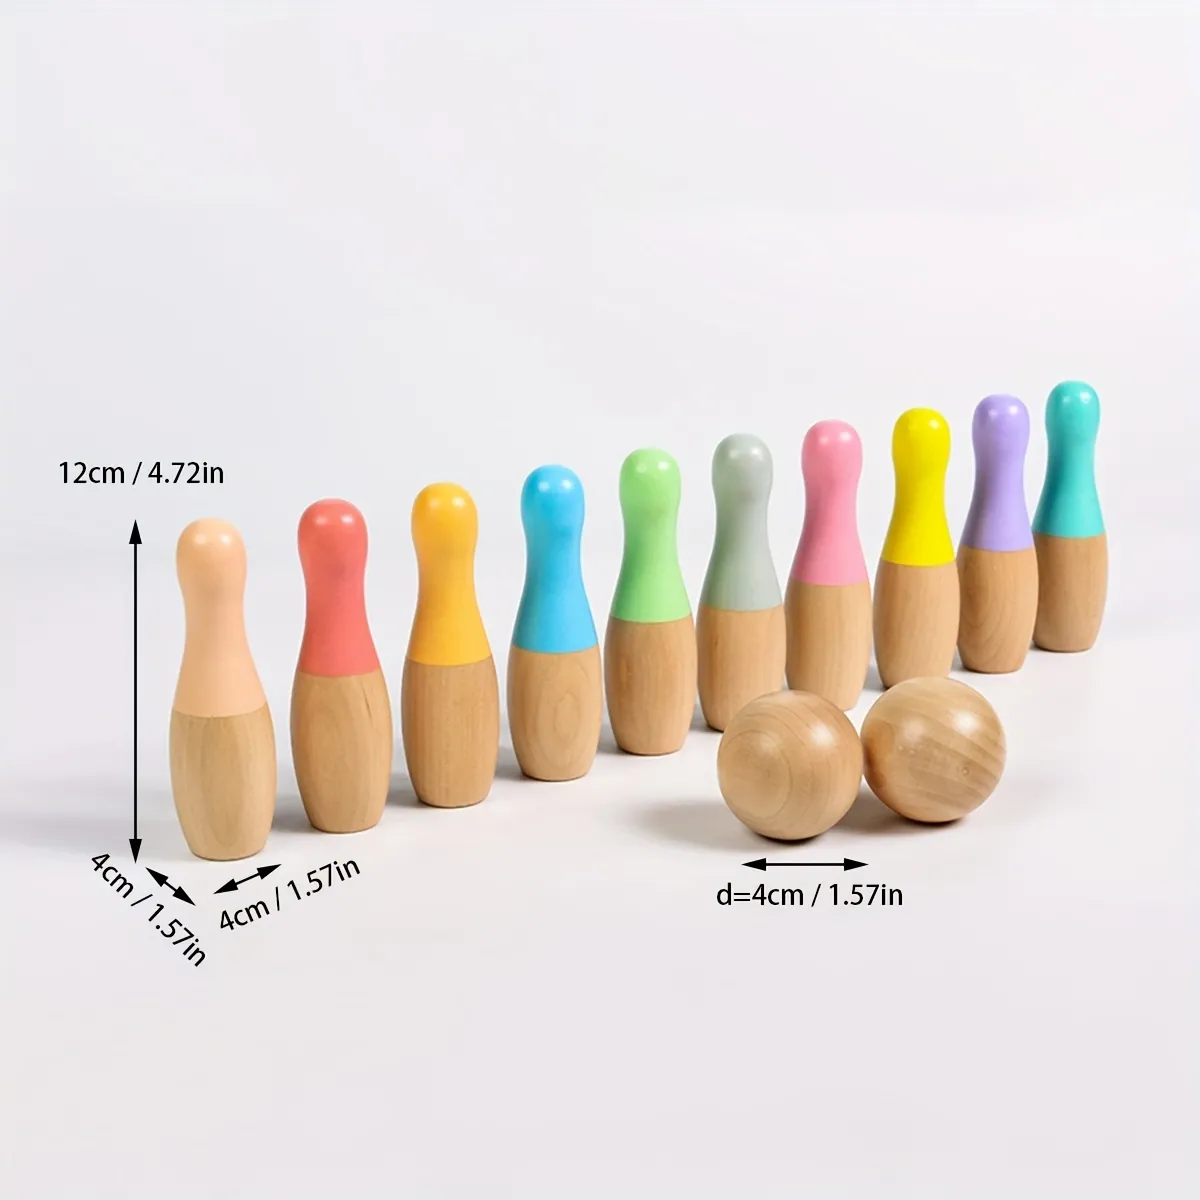 Realistic Wooden Desktop Bowling Game Toy - An Interactive Parent-child Toy For Boys and Girls!